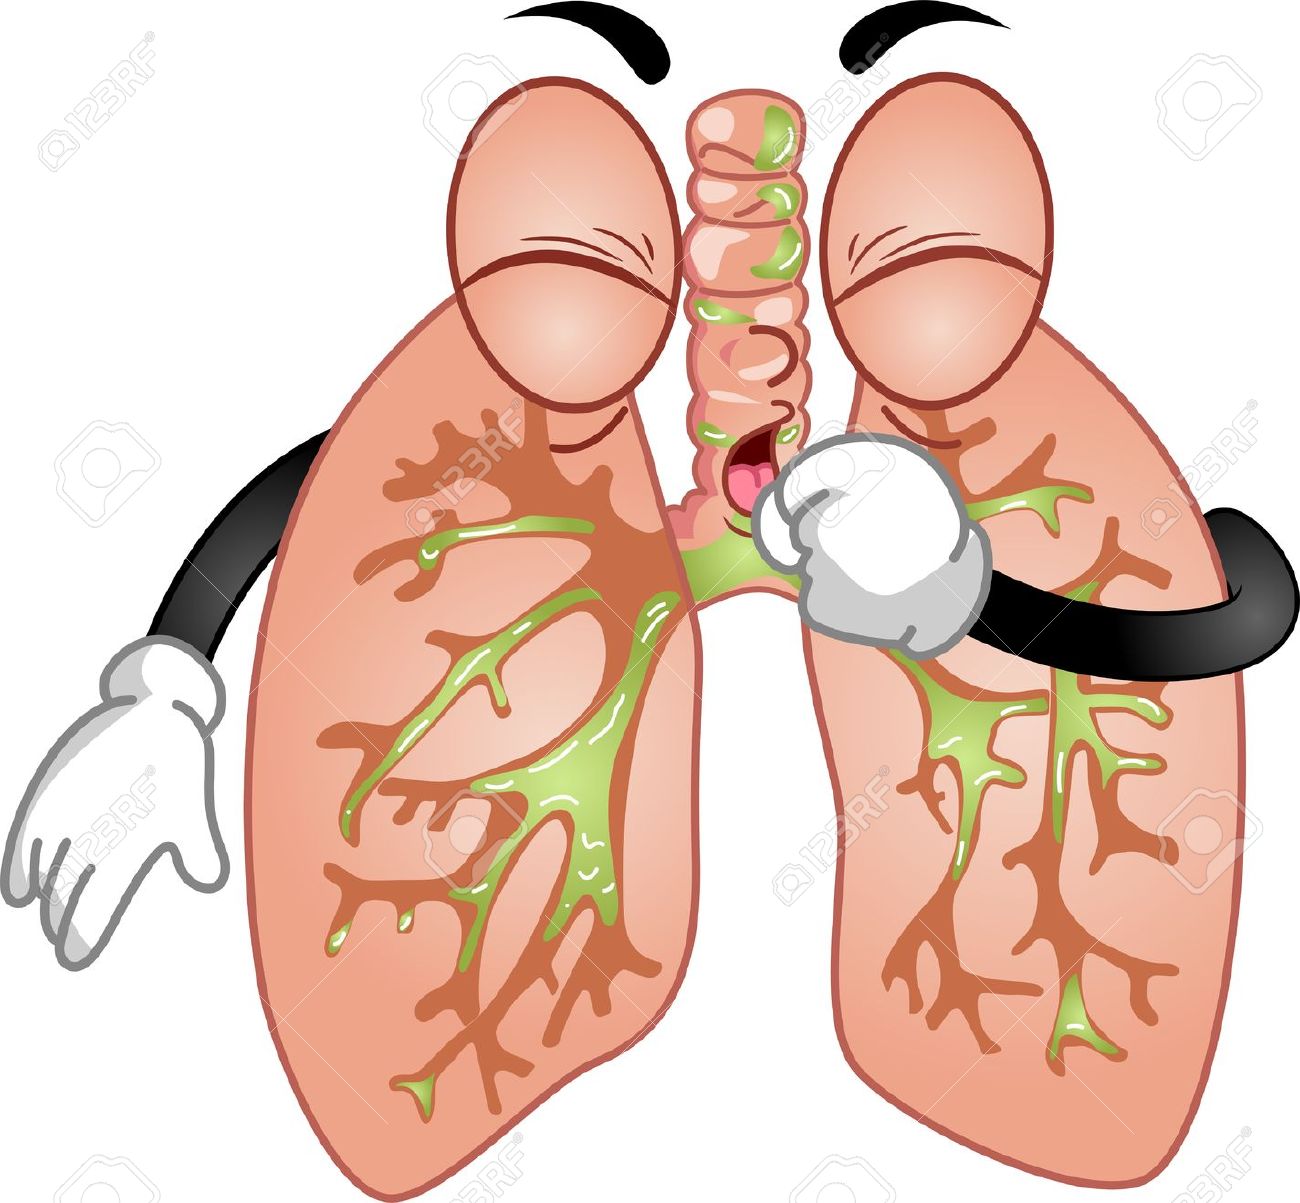 Person coughing clipart.